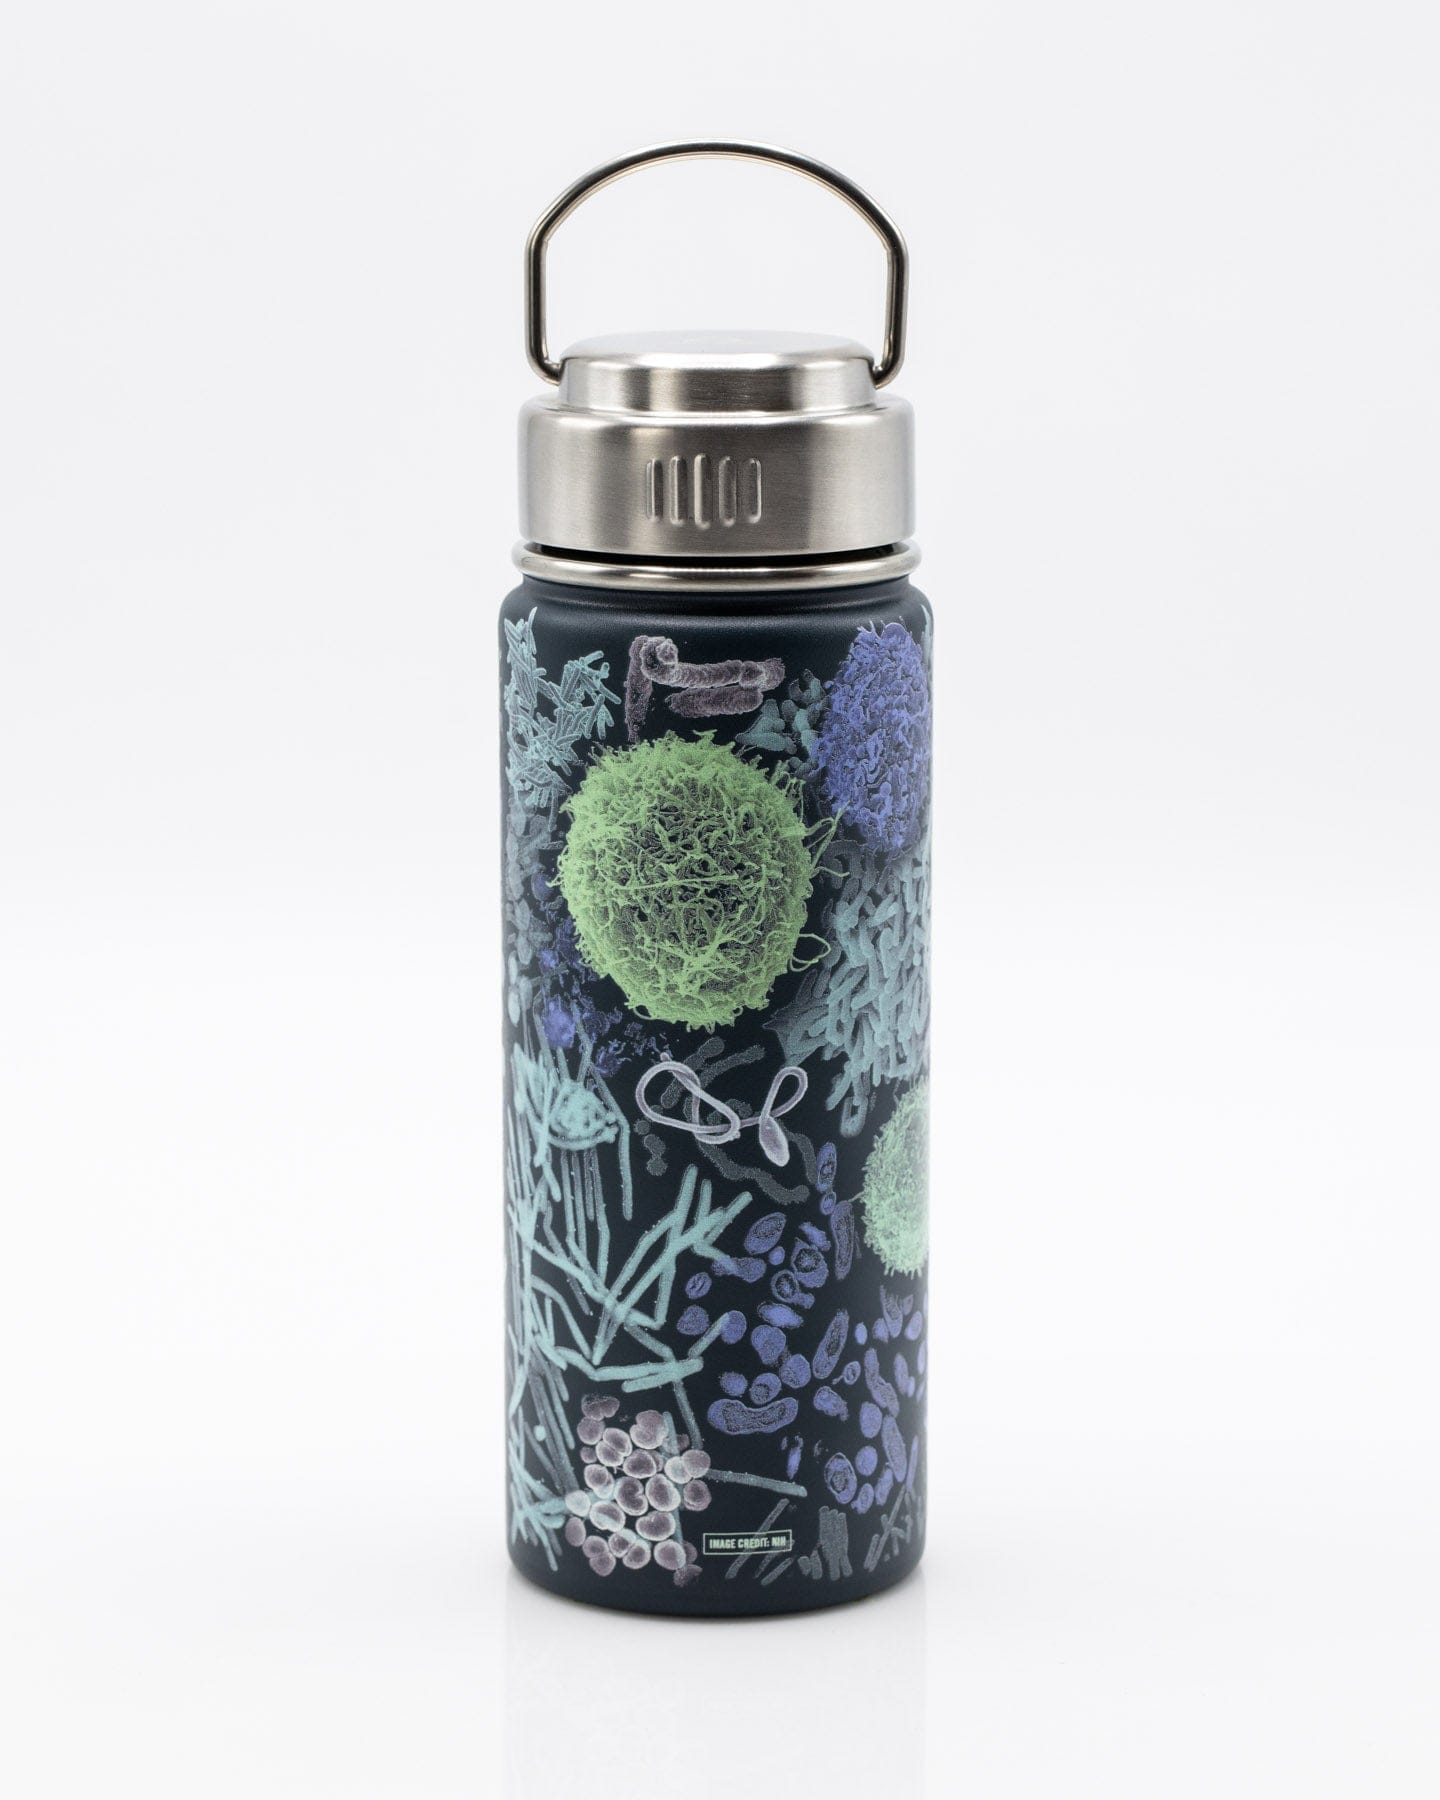 Infectious Disease Stainless Steel Vacuum Flask / Insulated Travel